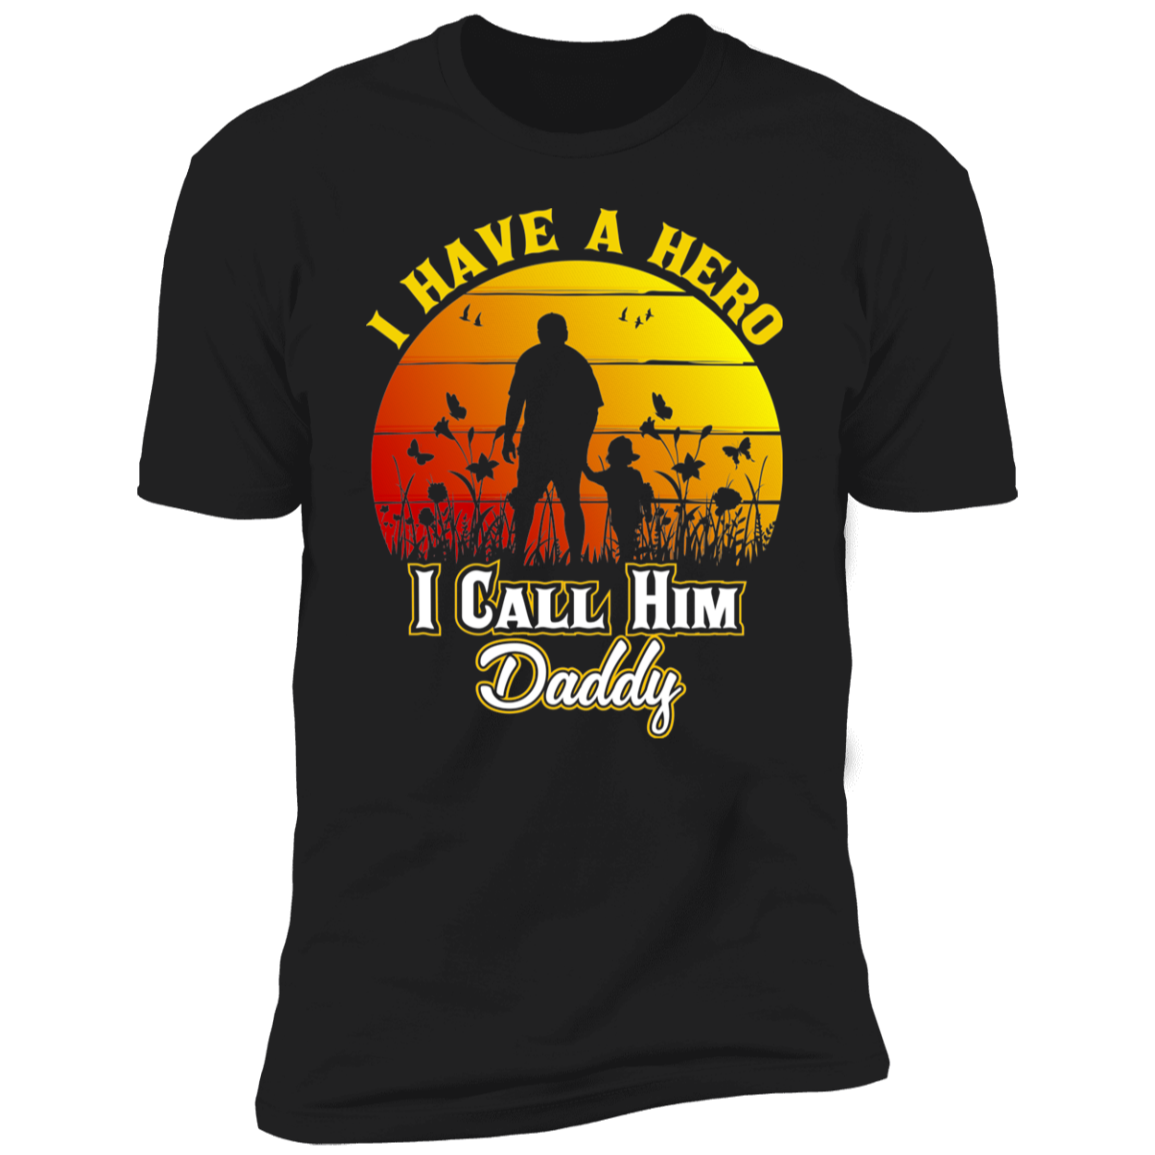 I HAVE A HERO I CALL HIM DADDY-Premium Short Sleeve T-Shirt